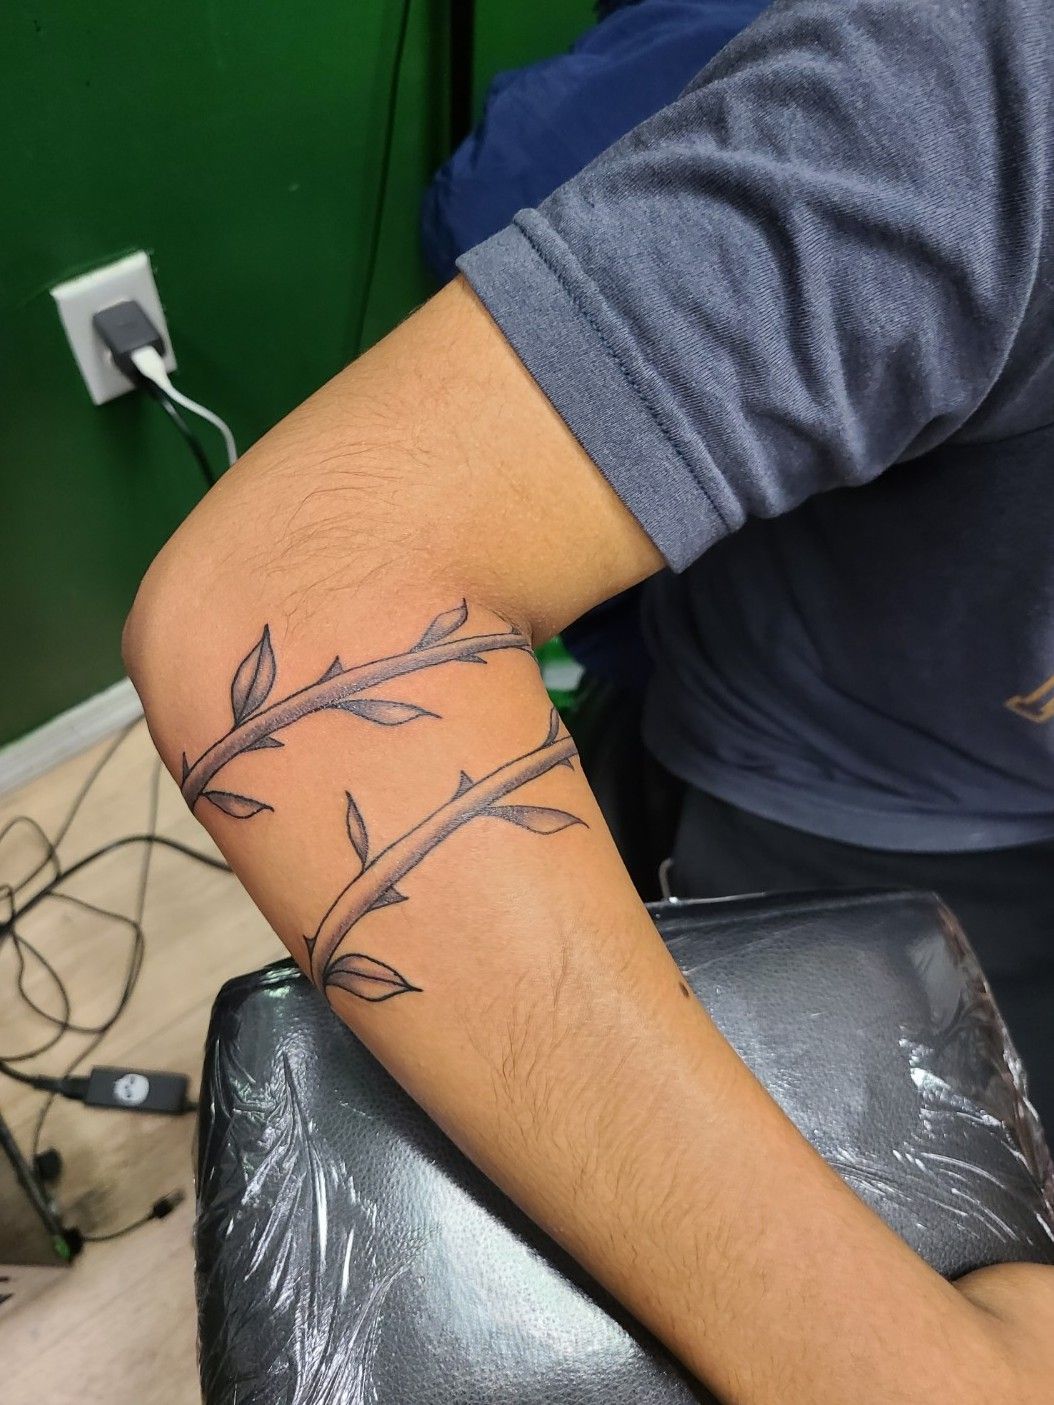 Mike Tattoo Artist on Twitter The VineTattoo is an interesting and  eyecatching type of tattoo that you have come across Popular among women  Vine tattoo holds a symbolic importance to the one